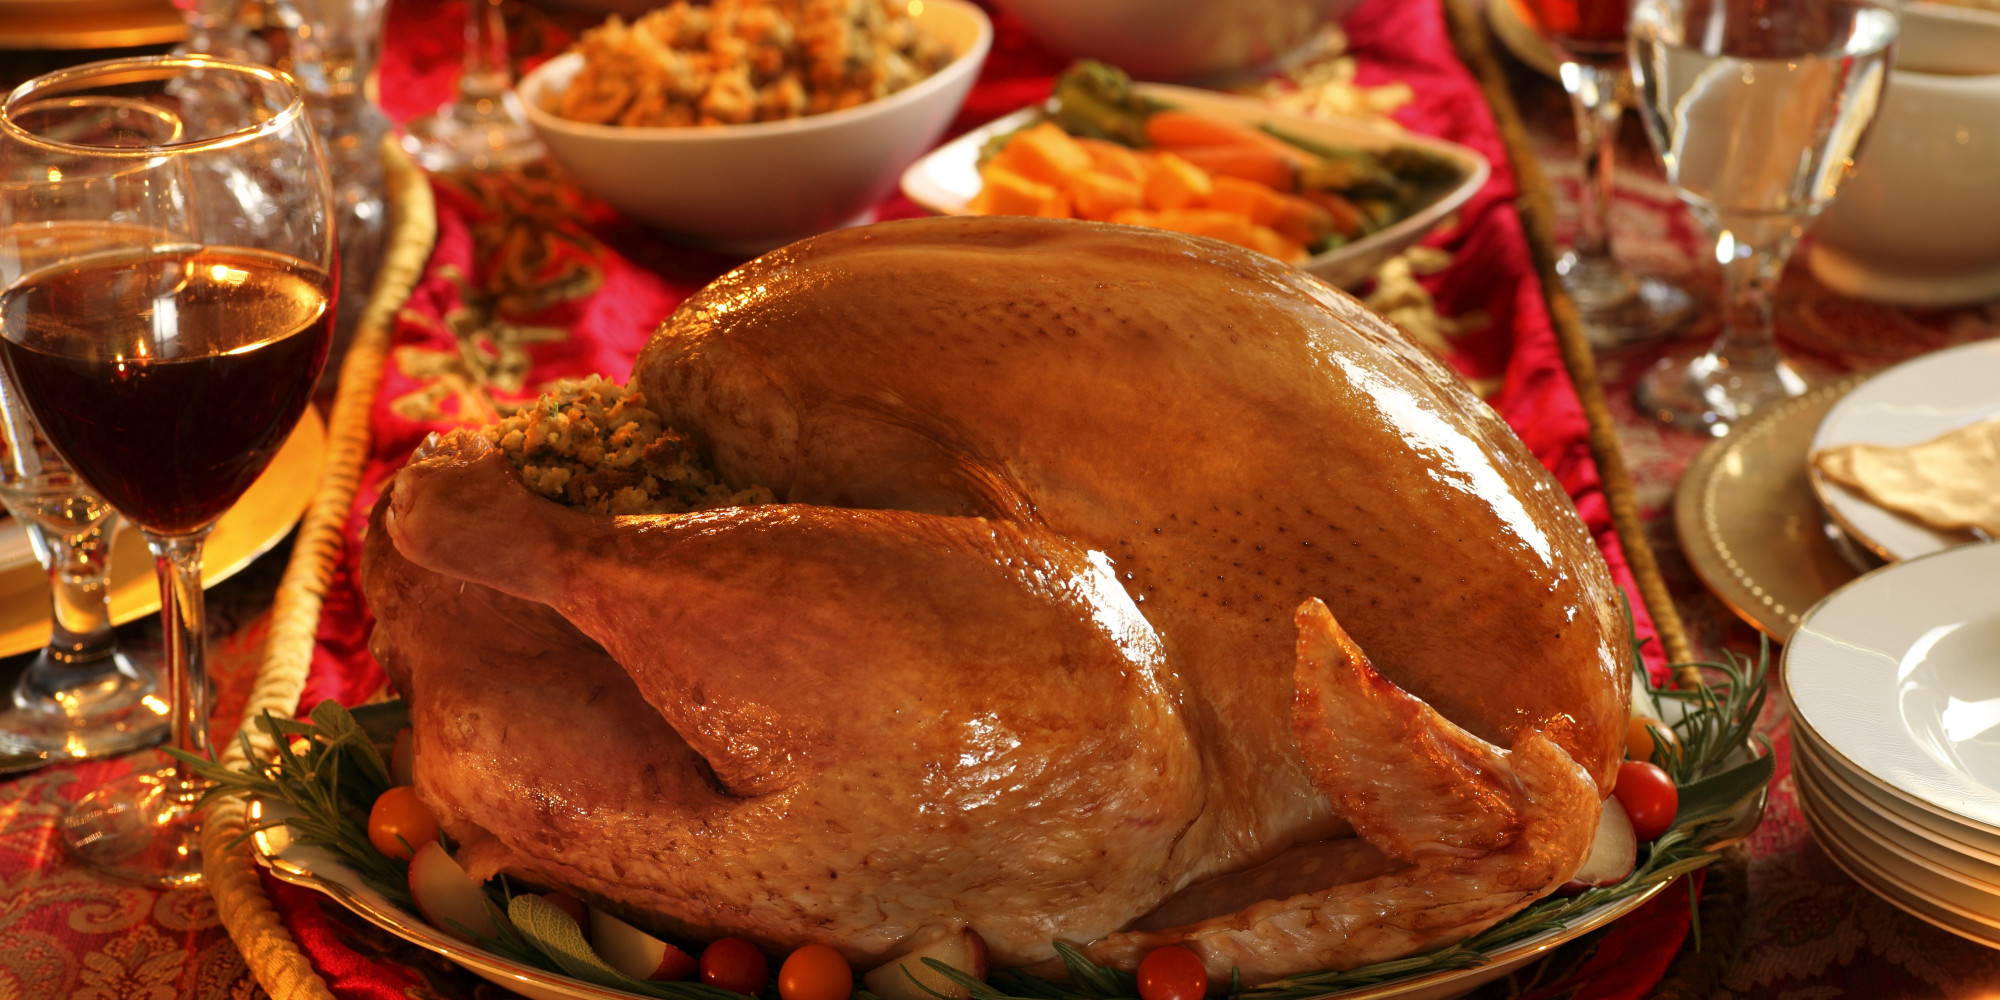 The top 20 Ideas About Craigs Thanksgiving Dinner In A Can - Best Recipes Ever